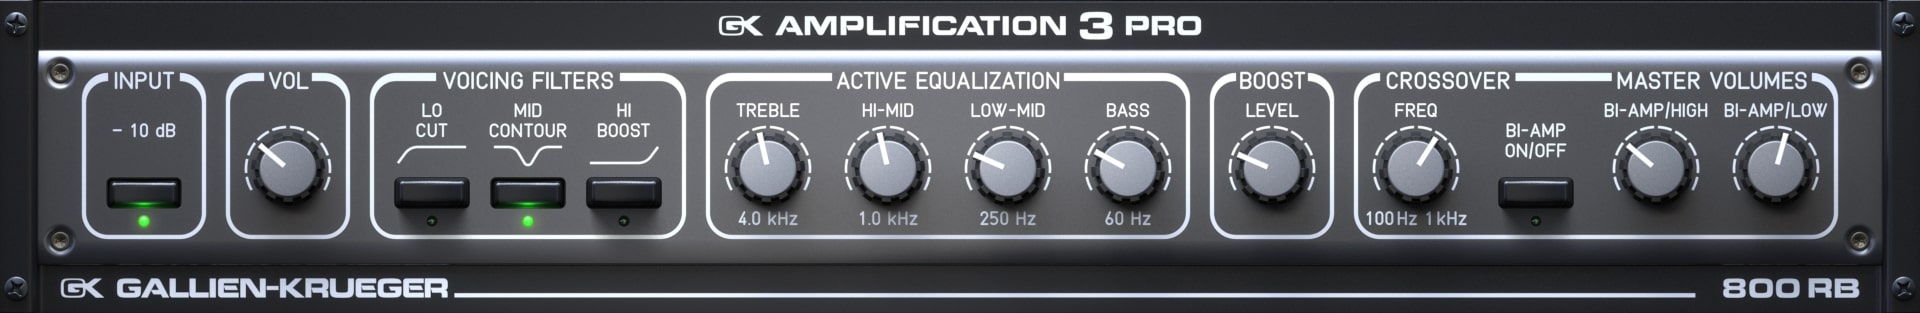 GK Amplification 3 Pro by Audified